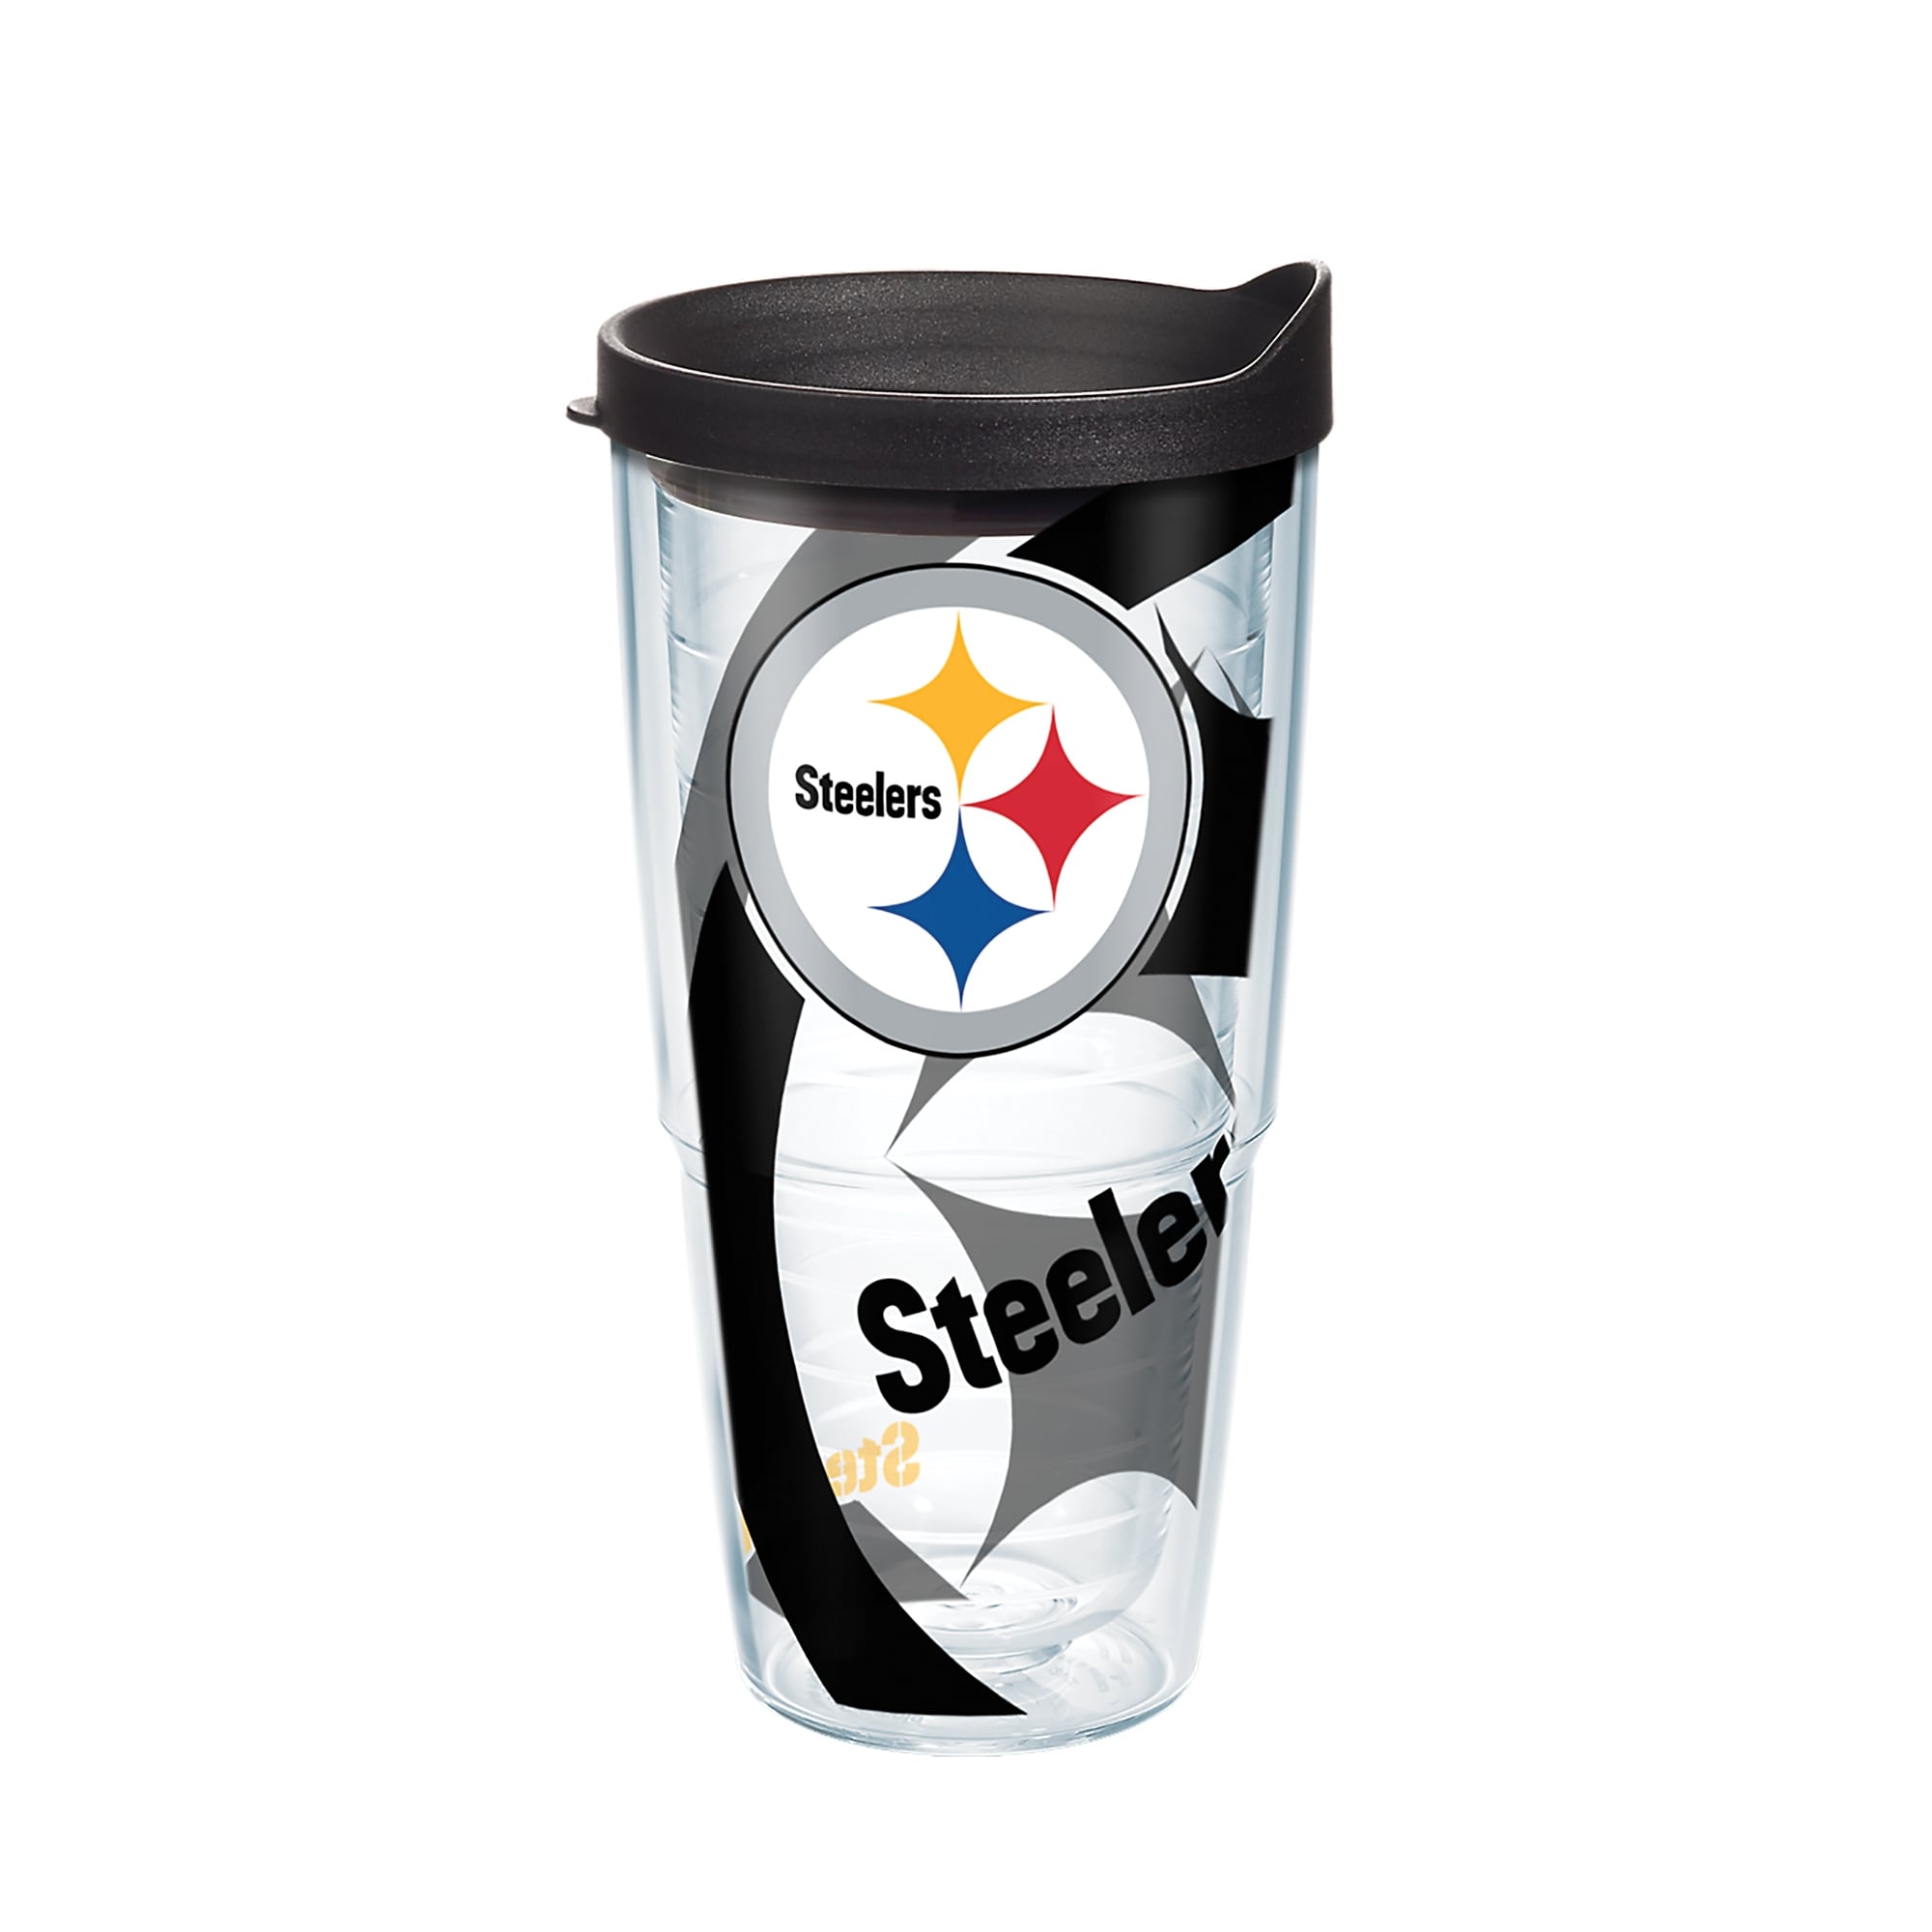 https://ak1.ostkcdn.com/images/products/is/images/direct/7fc9292f61bf60f0b330dd2c0f4b6afaa2fe8363/NFL-Pittsburgh-Steelers-Genuine-24-oz-Tumbler-with-lid.jpg